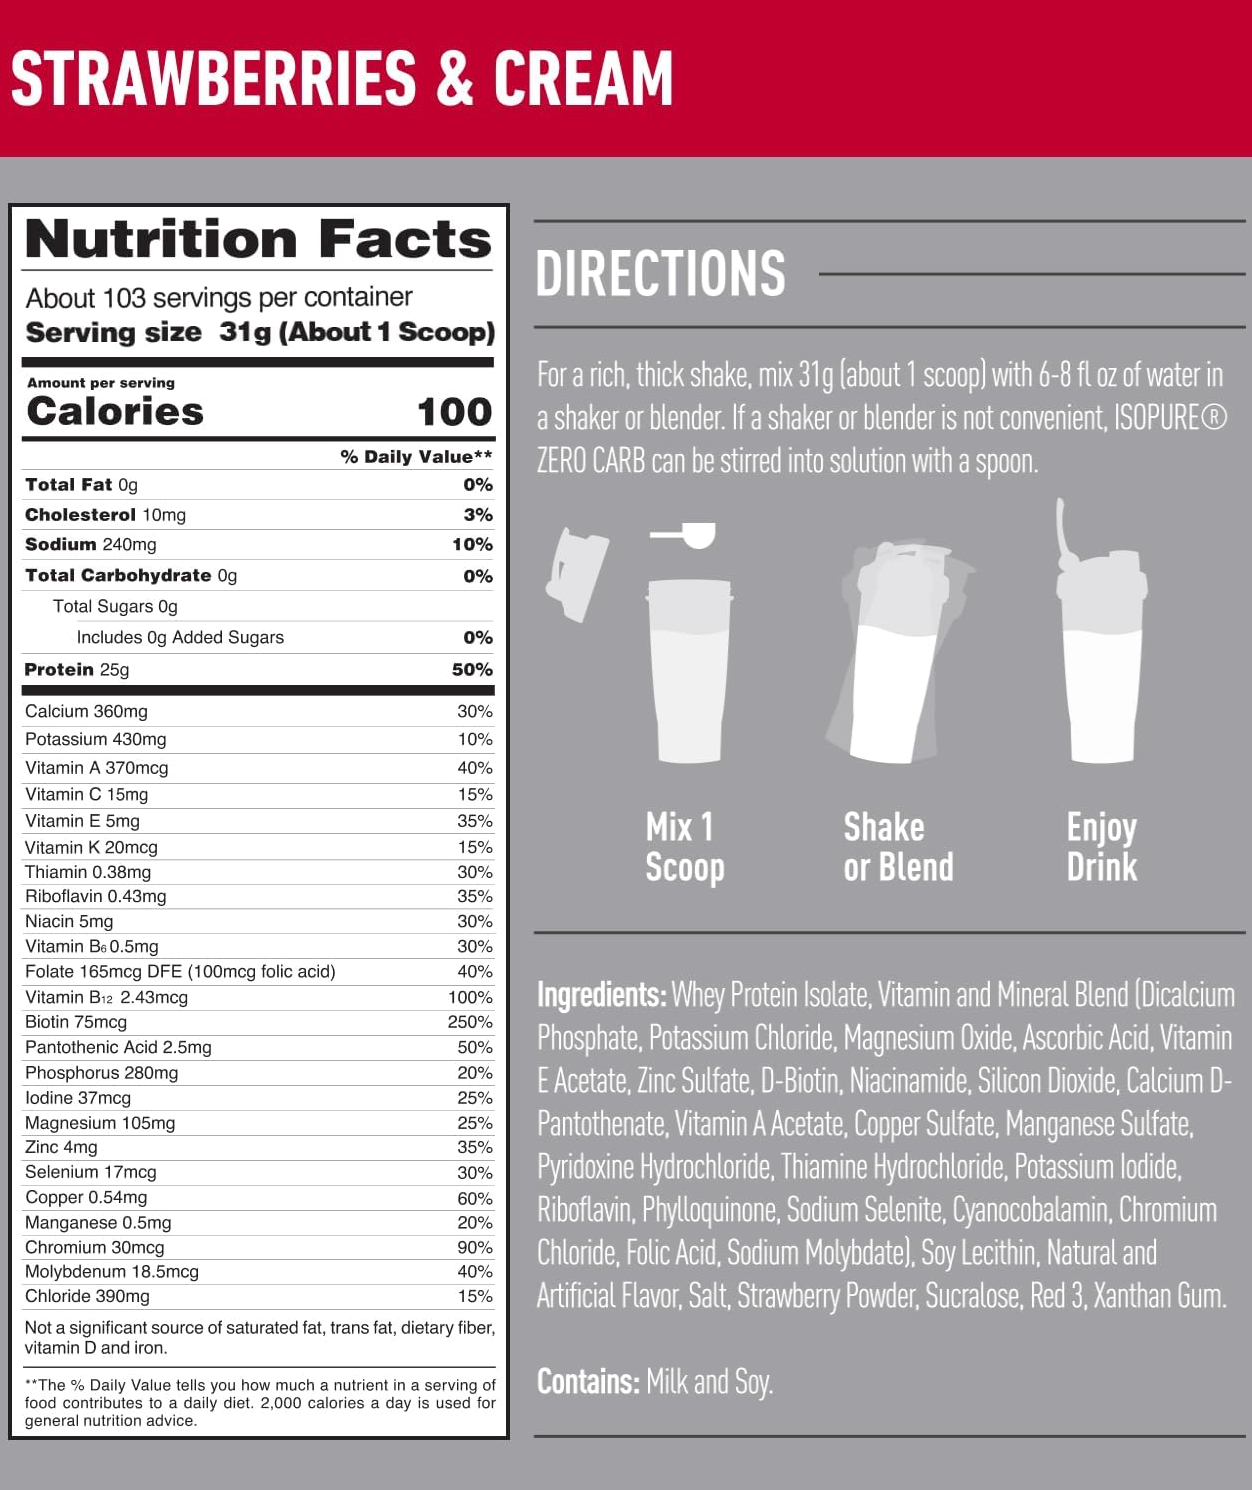 Nutrition facts for Strawberries & Cream 31g serving. Contains 25g protein, various vitamins, minerals. Mix with water for a protein shake.